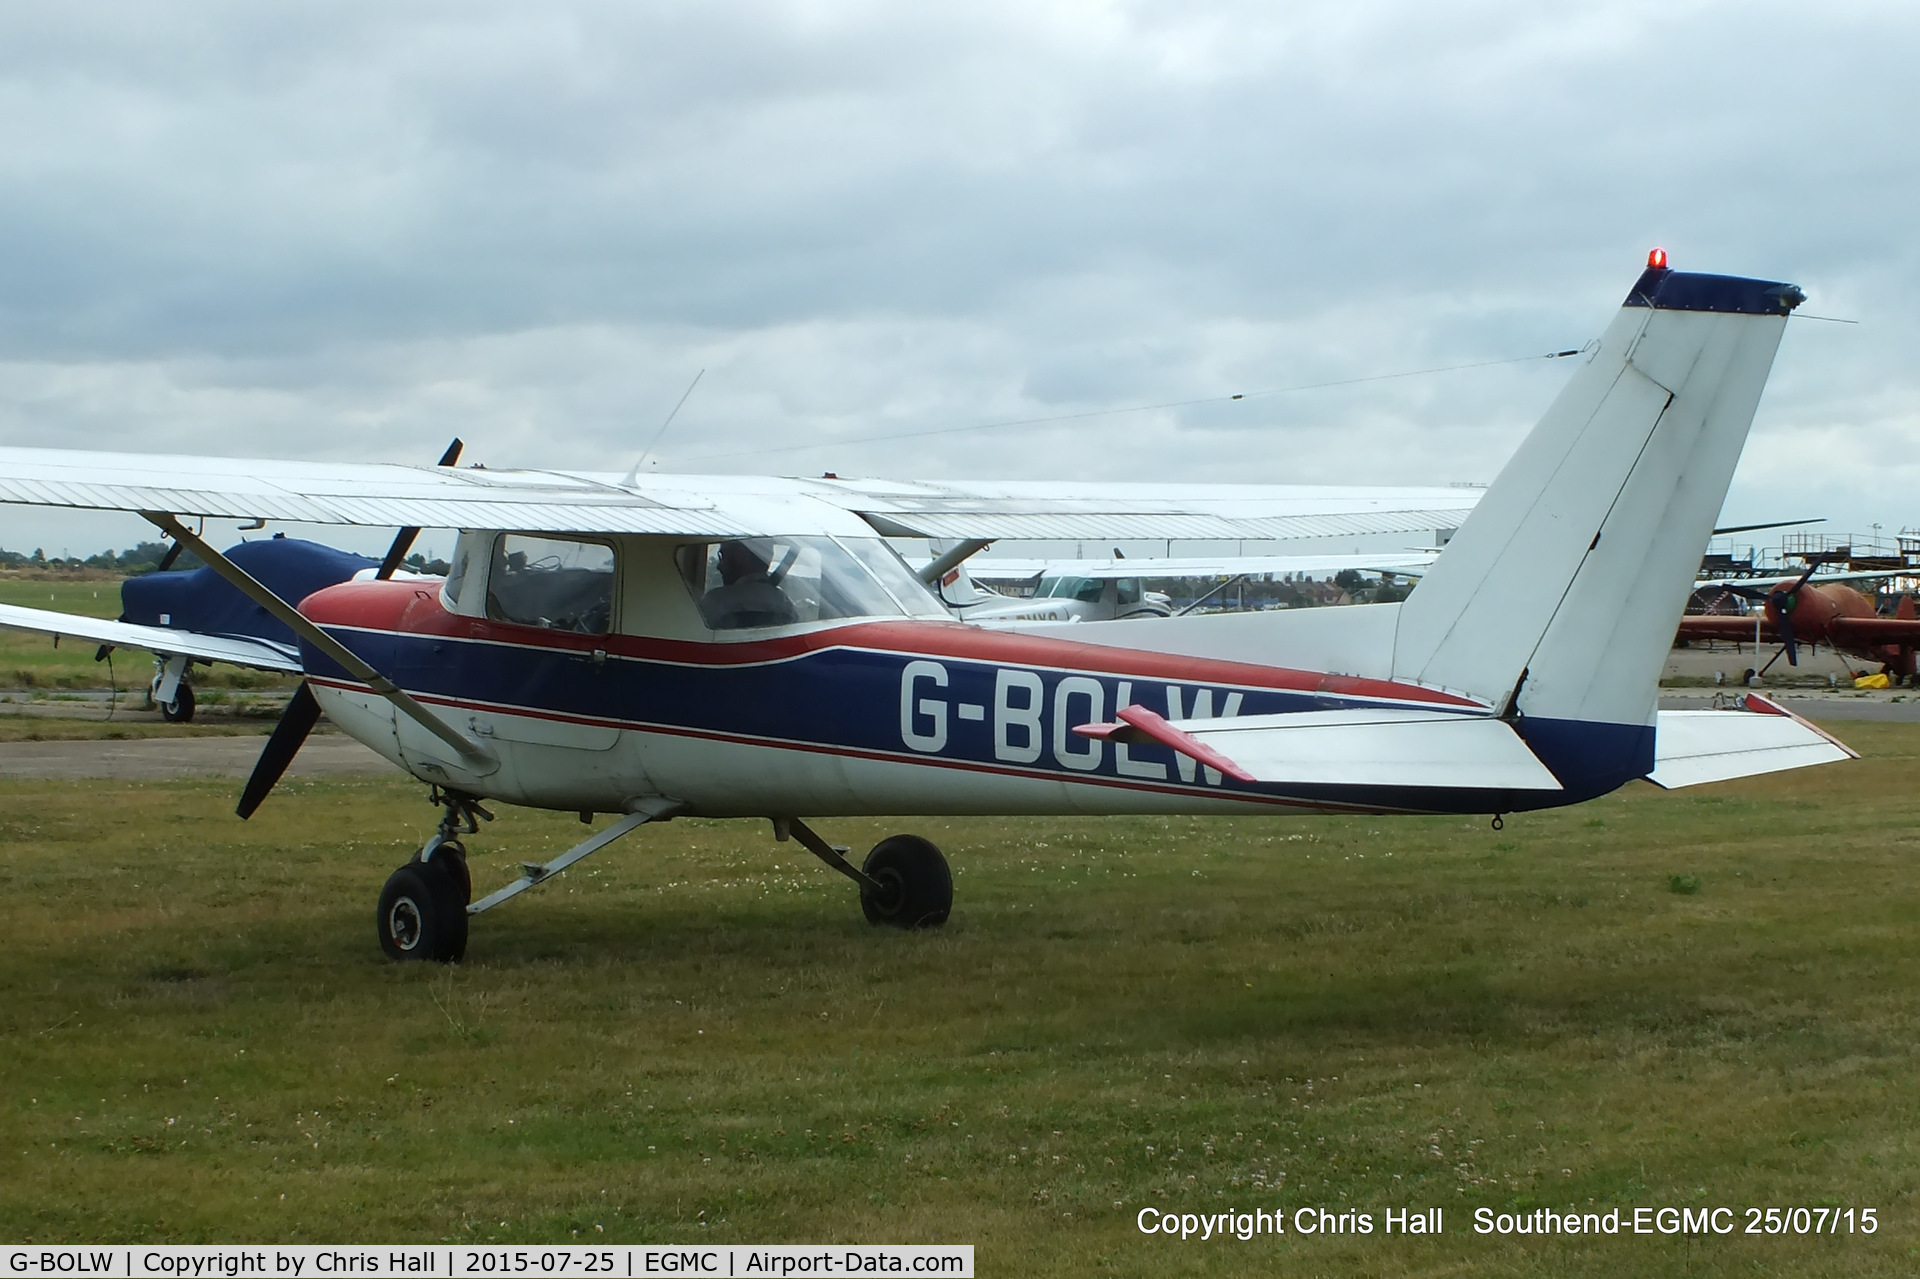 G-BOLW, 1977 Cessna 152 C/N 15280589, at Southend